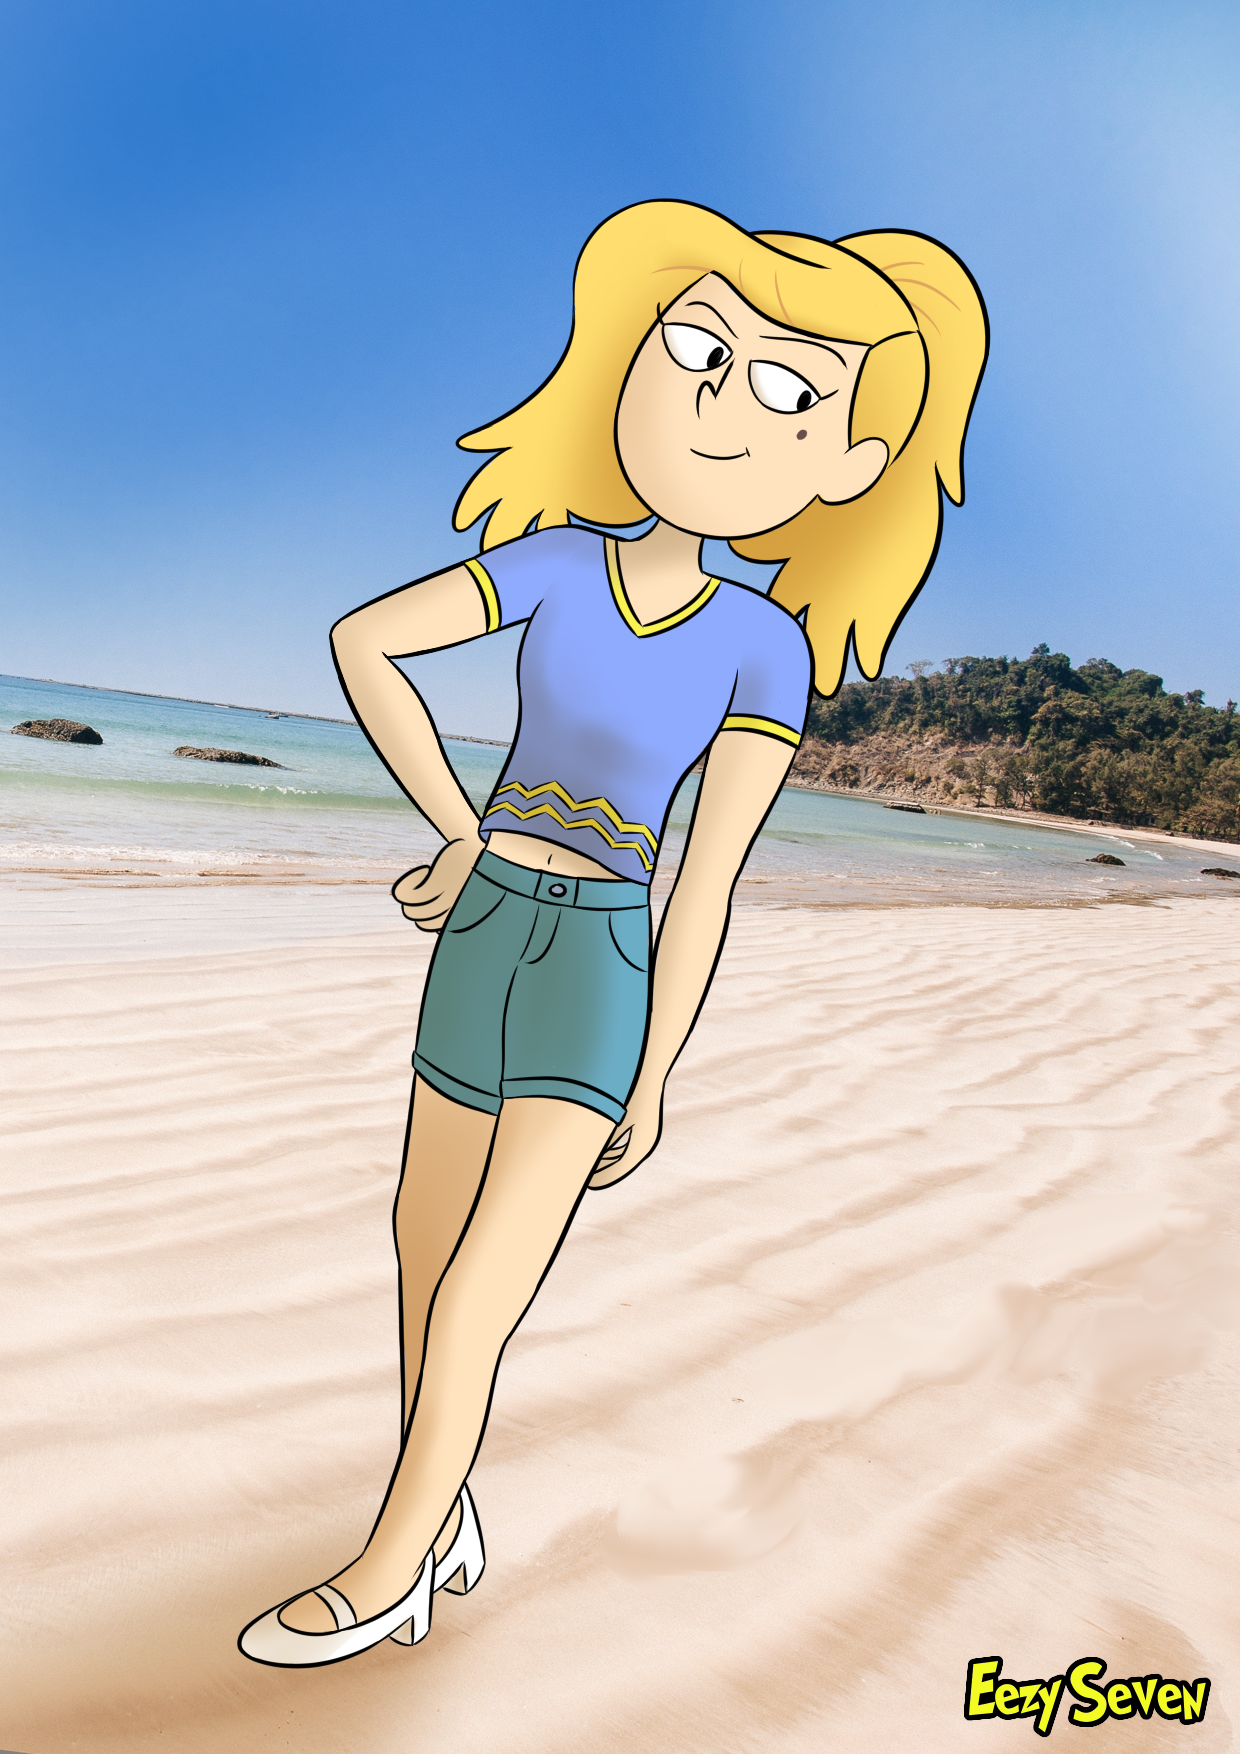 20yr Old Sasha in the Summer by EezySeven on DeviantArt